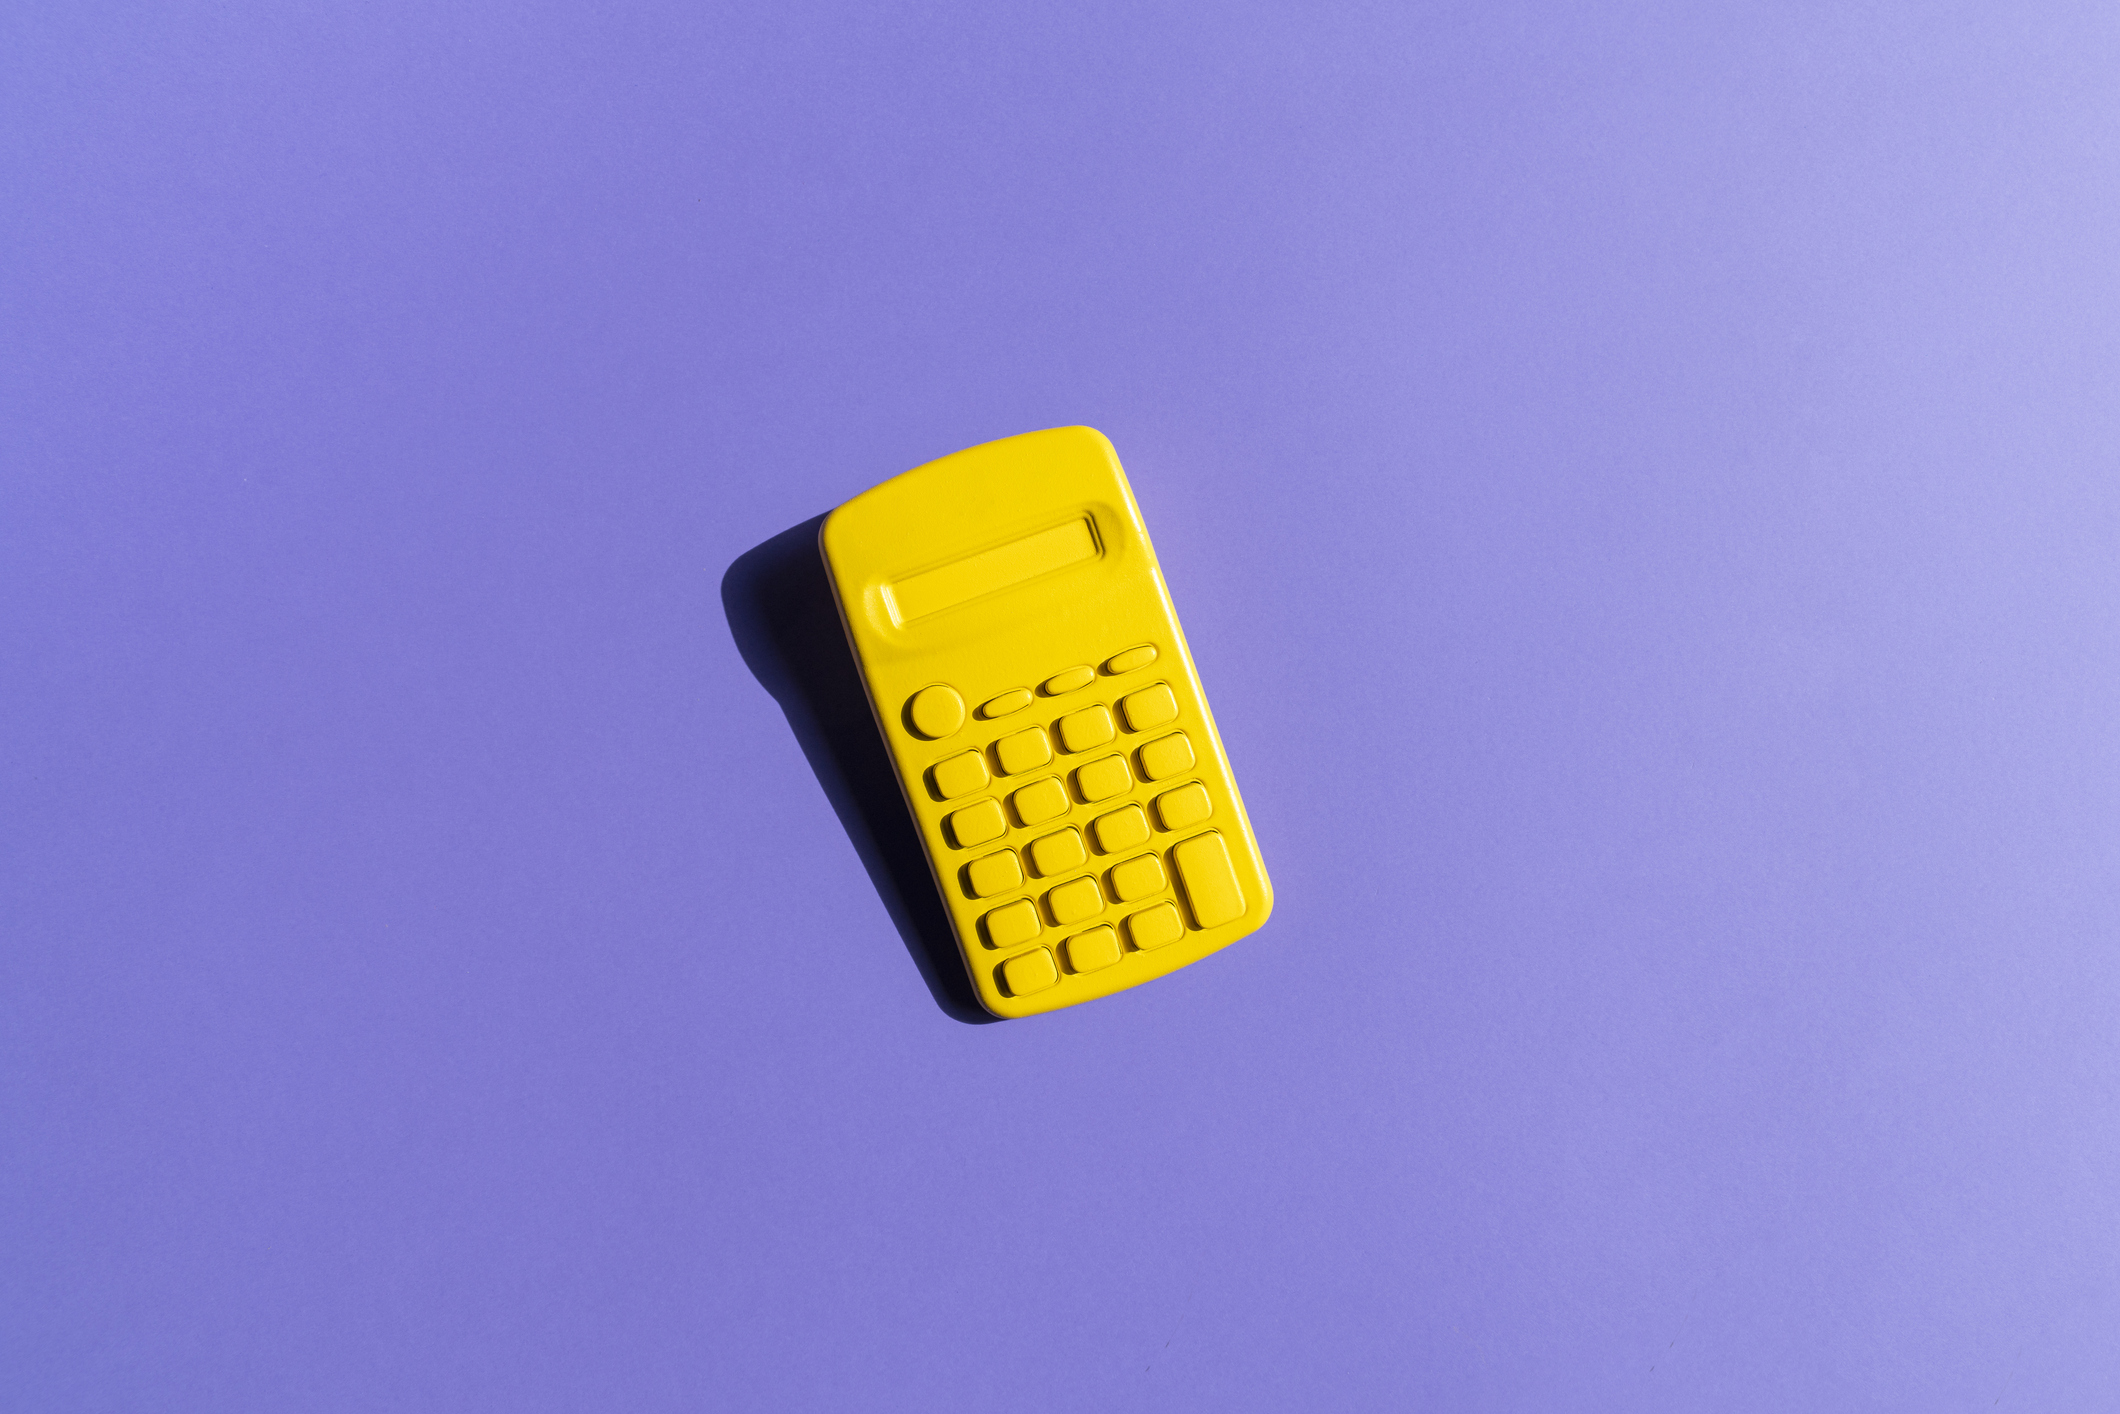 Yellow Calculator On Purple Background; financial model to forecast fundraising